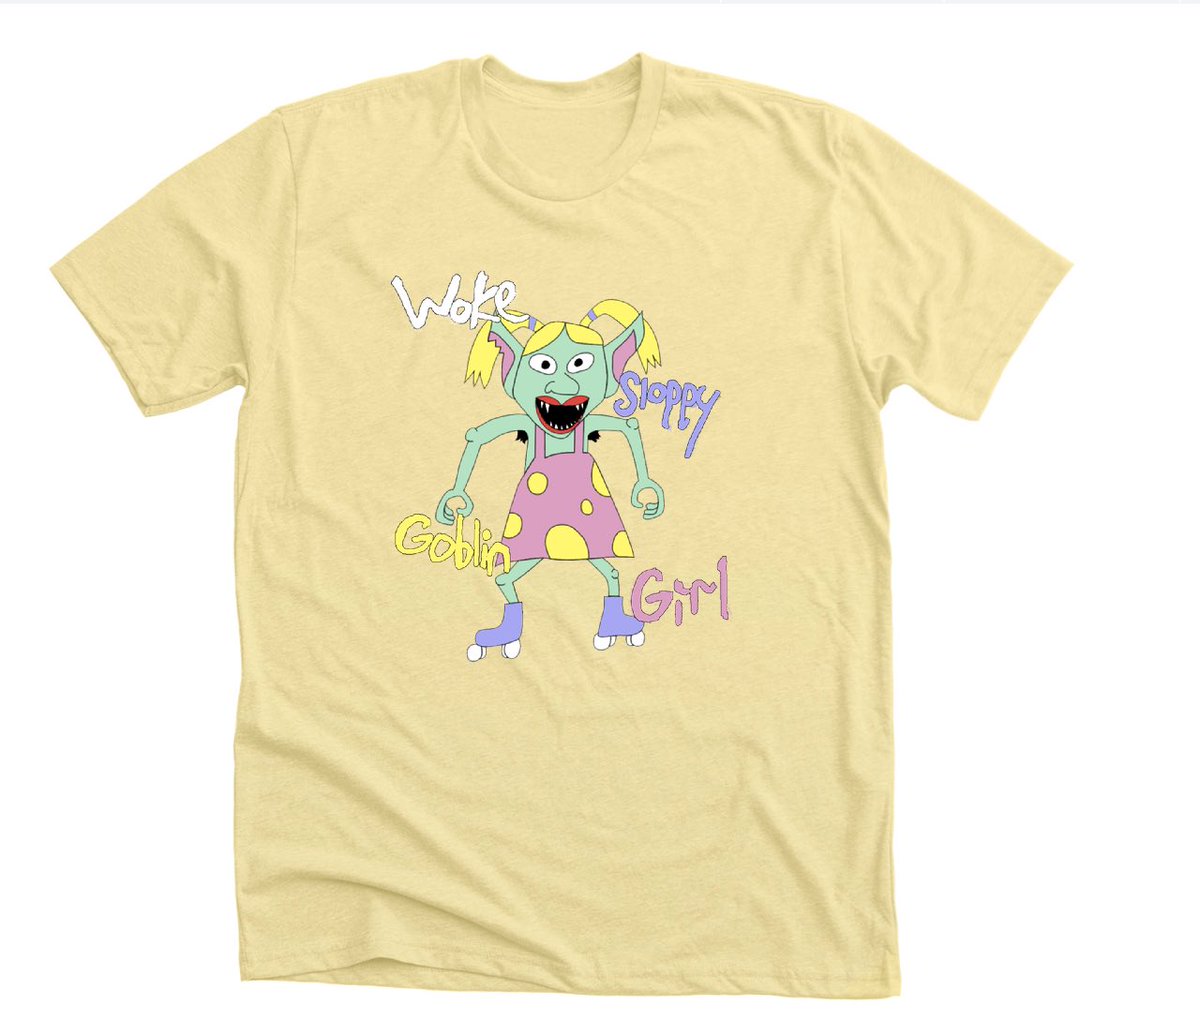 i make a living pitching mascots, and it’s not easy being one of the only mascot salesmen. if you’d like, you can help support me by buying some shirts from my previous pitch, TittyPussy. there are only 7 days left  http://bonfire.com/store/tittypussy